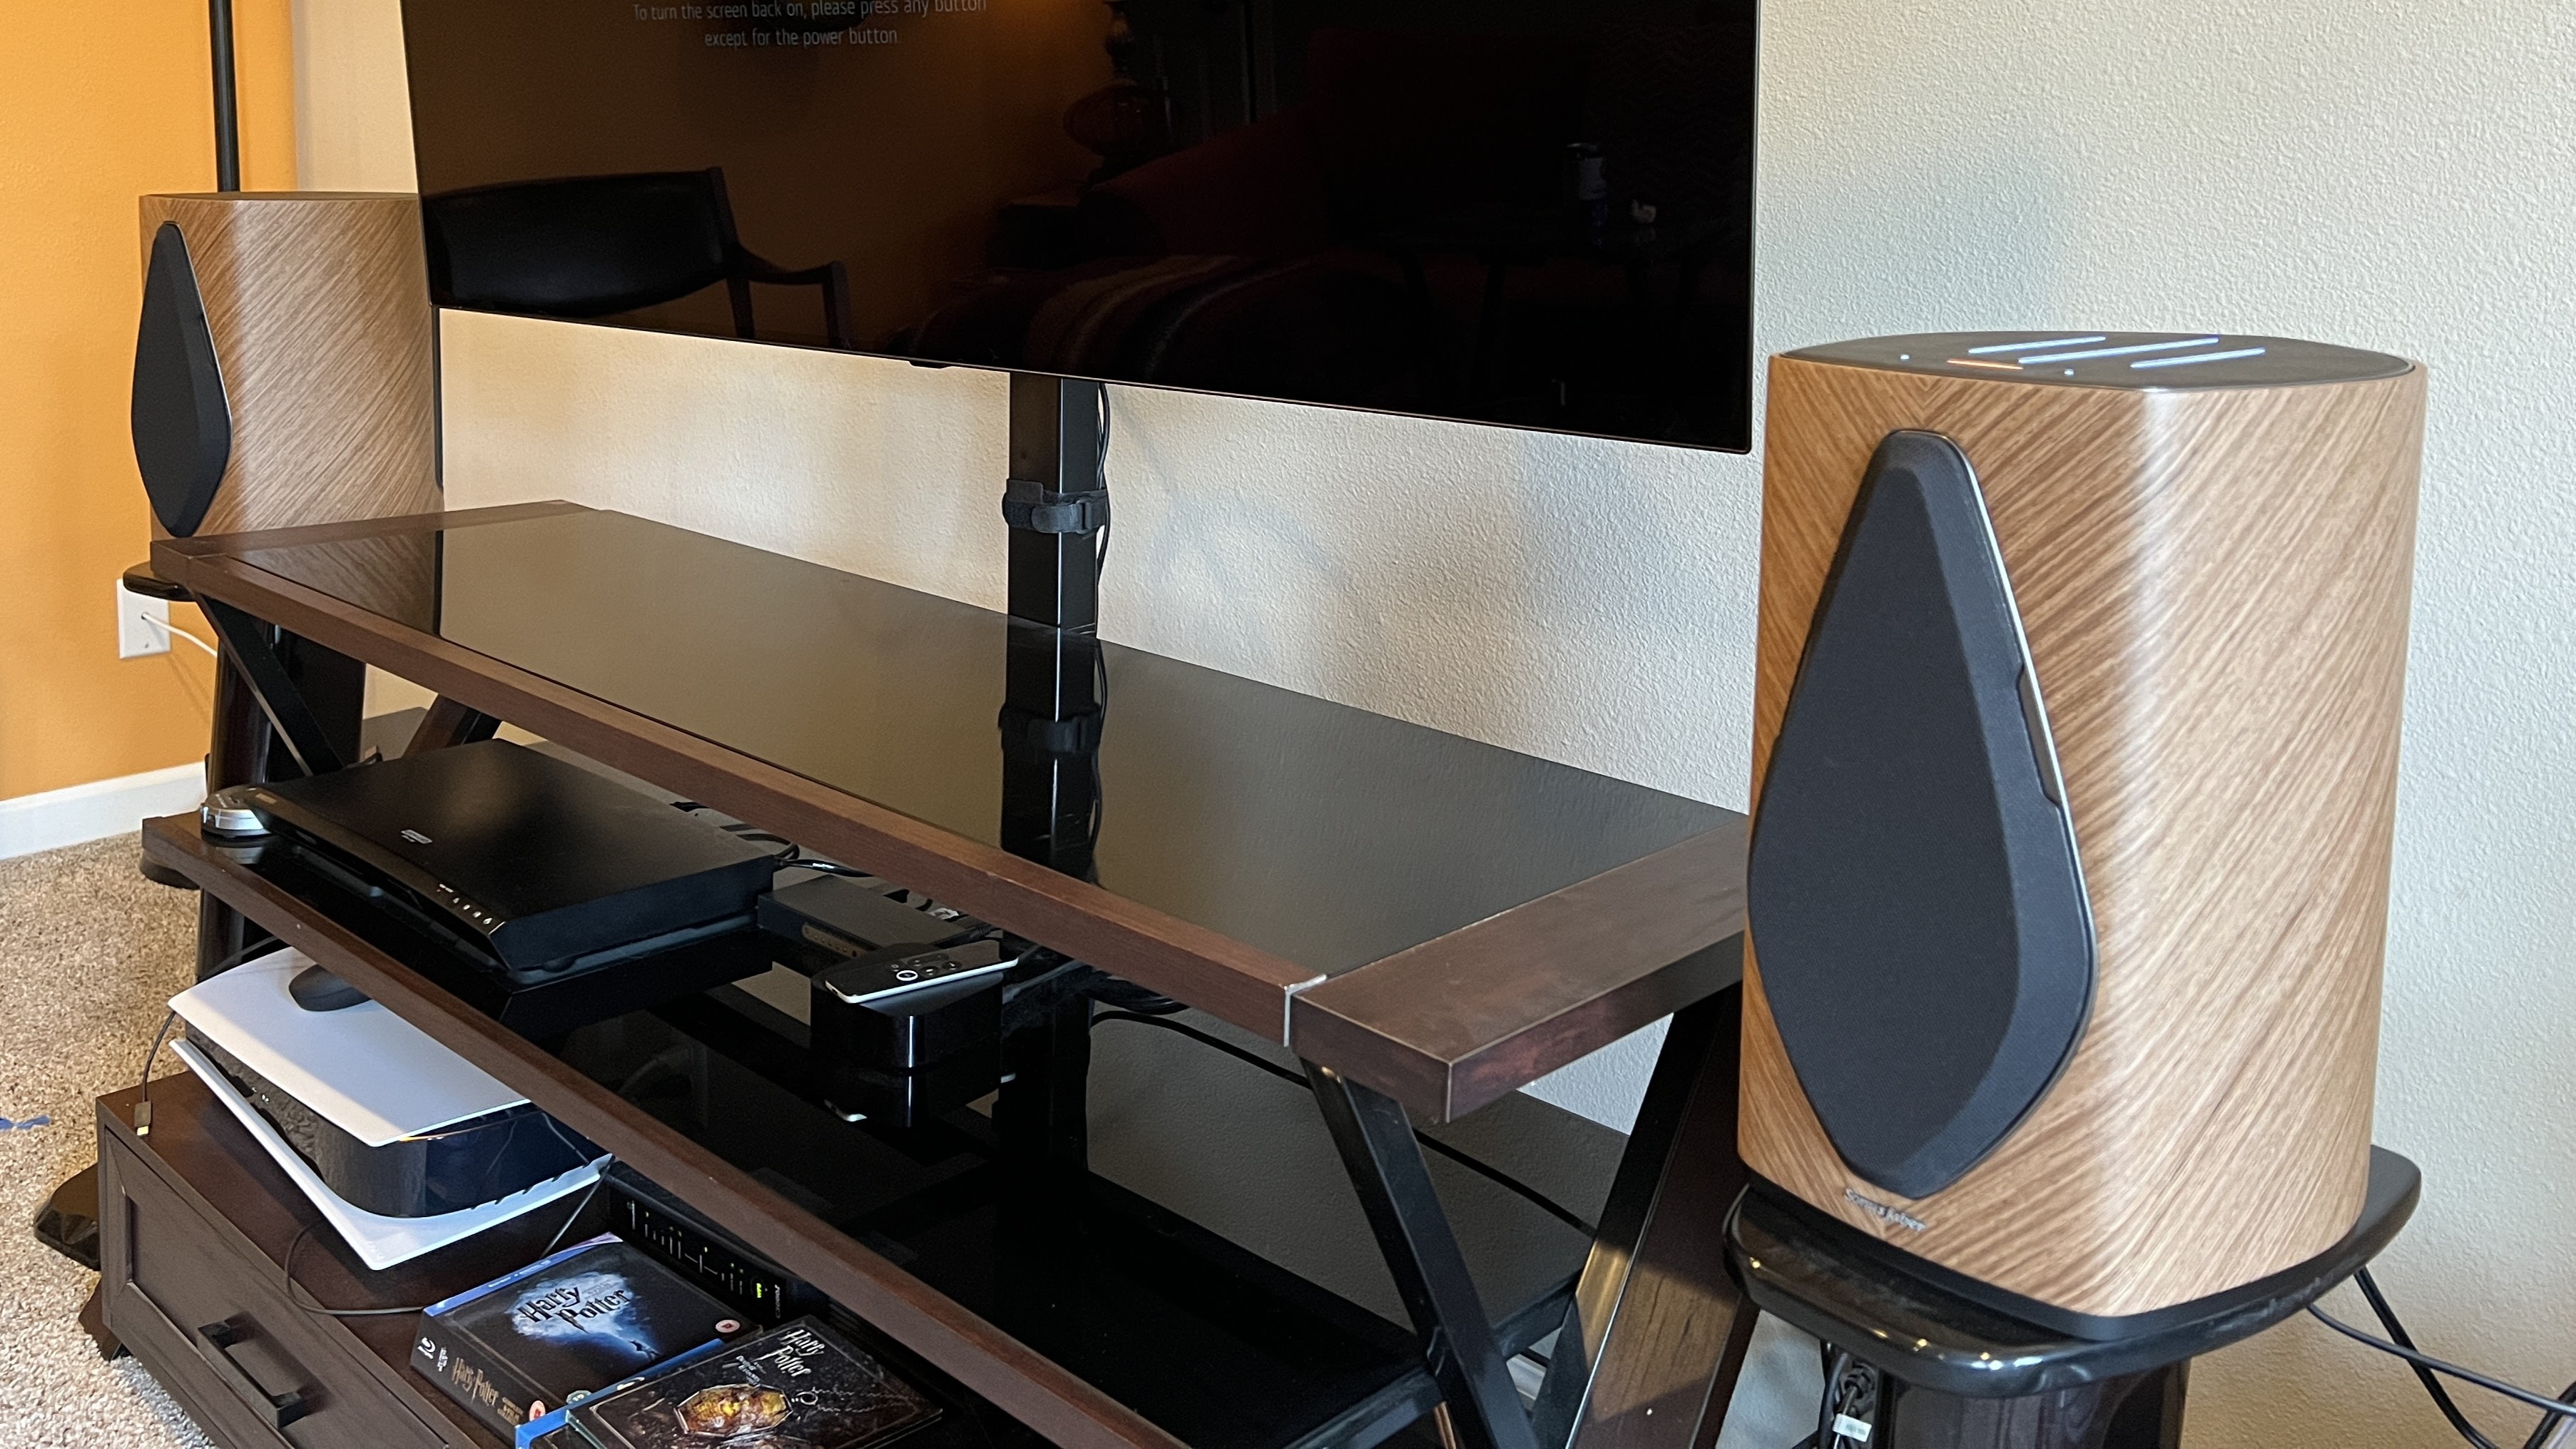 Sonus faber duetto speakers on stands in living room